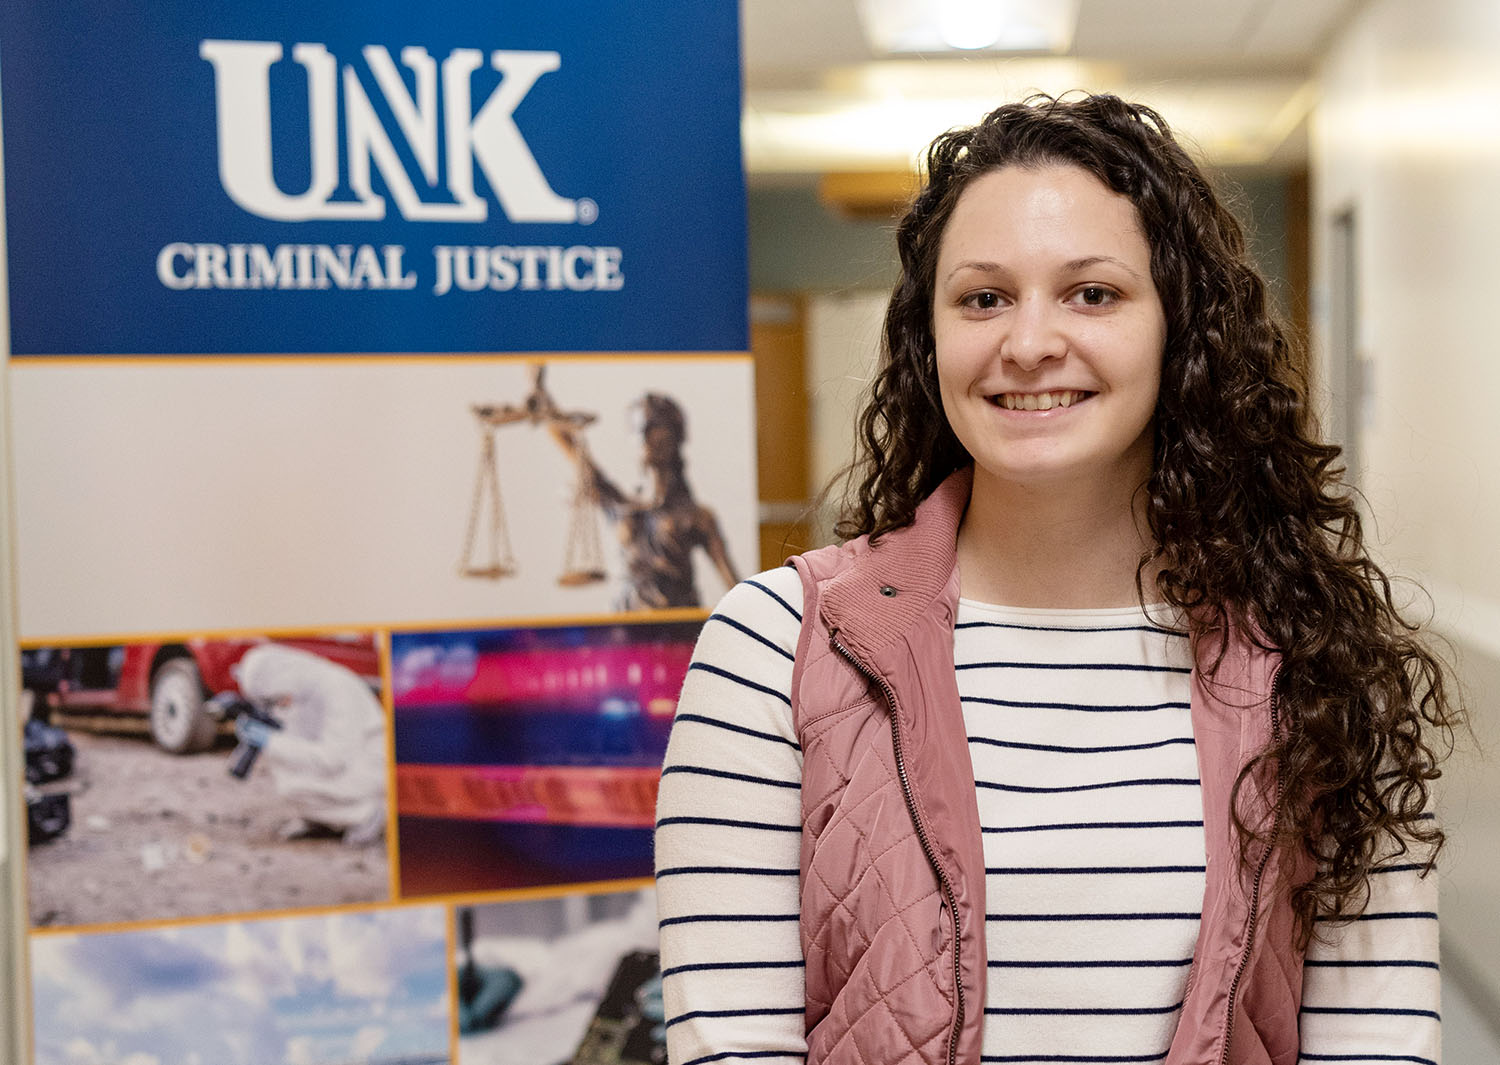 Jessica Peterson is finishing her first semester as an assistant professor in UNK’s Department of Criminal Justice. (Photos by Kosuke Yoshii, UNK Communications)